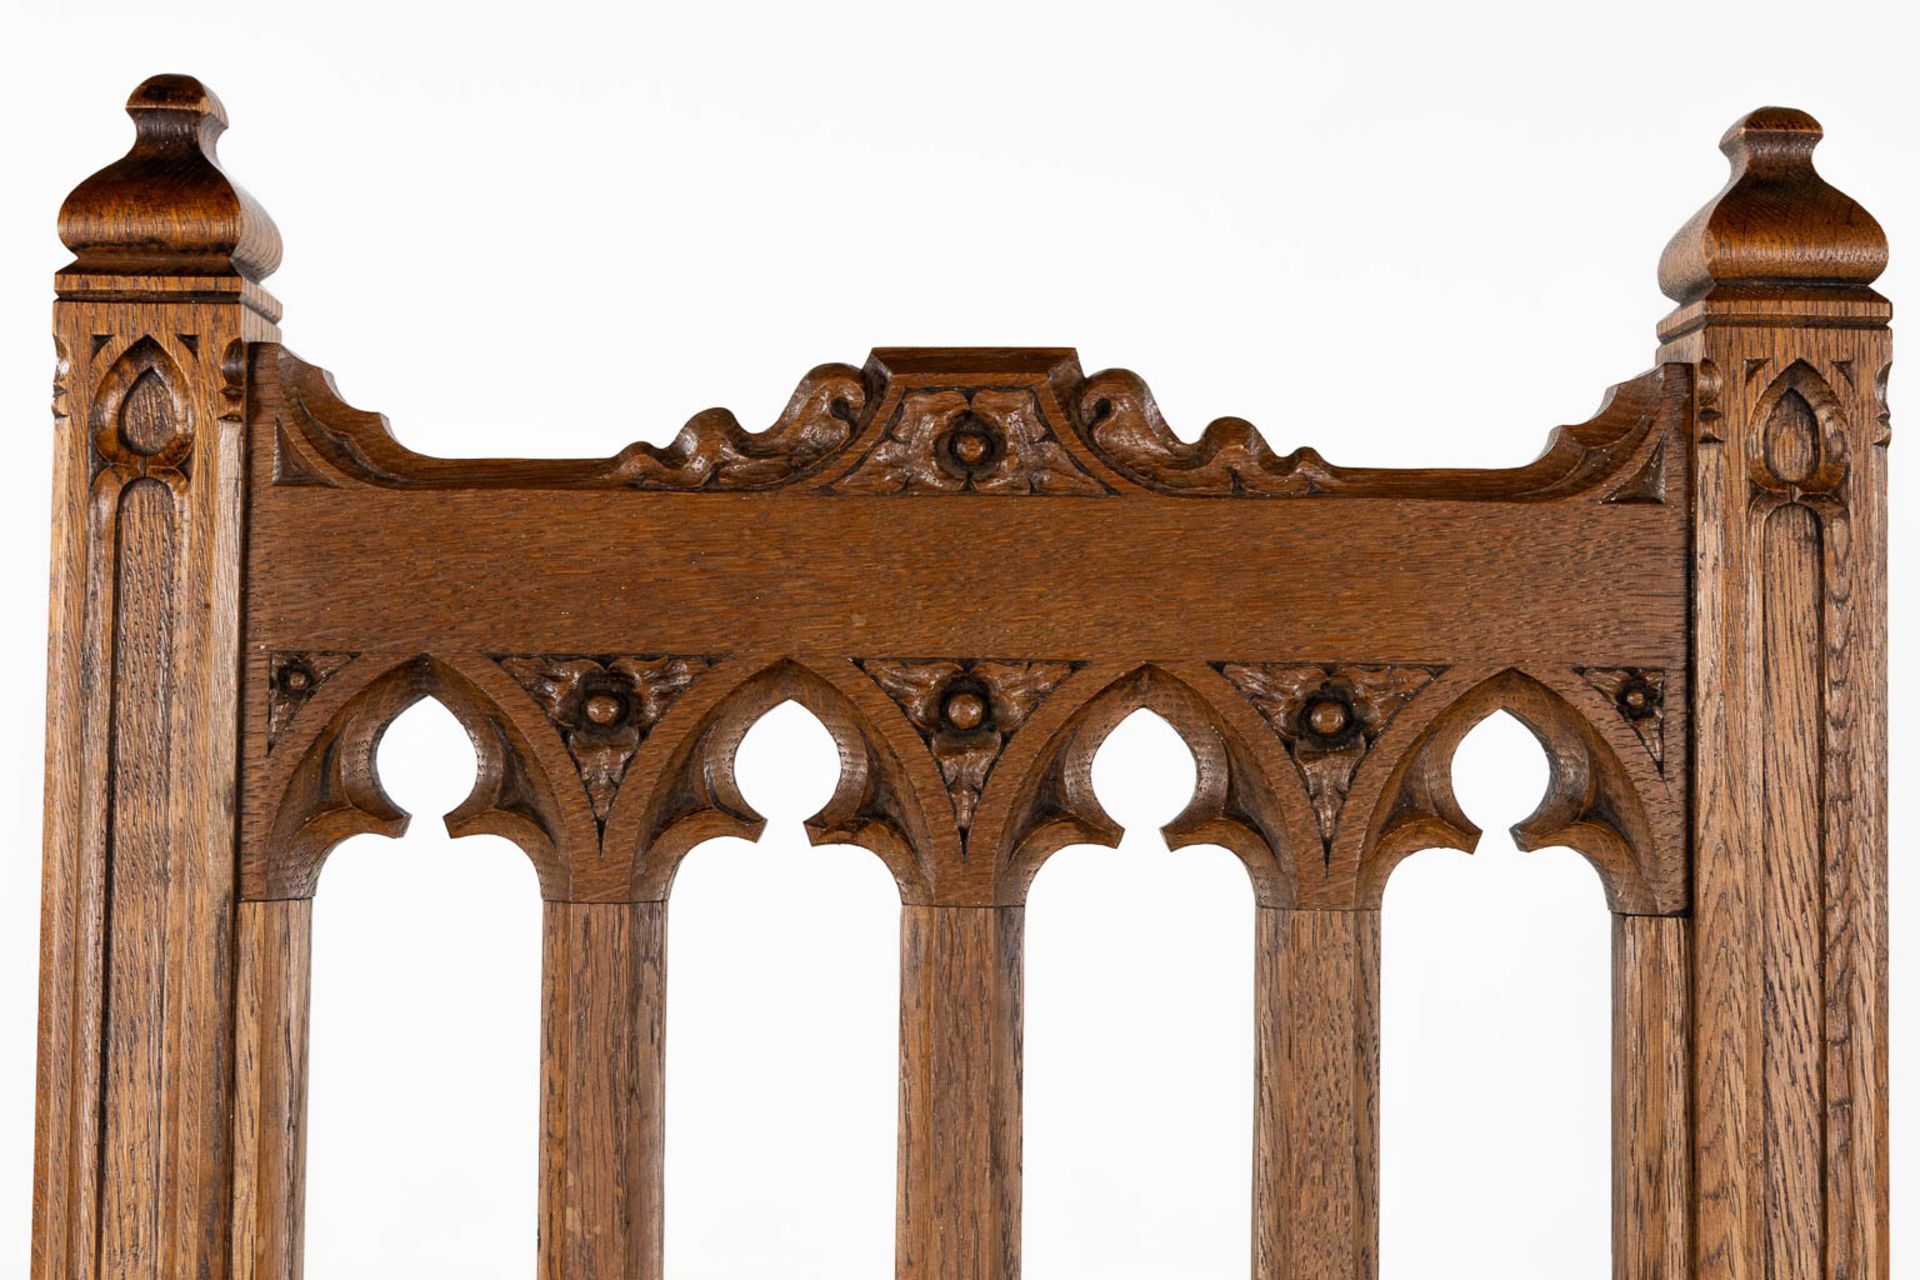 8 Gothic Revival style chairs, sculptured wood. Circa 1900. (L:54 x W:48 x H:123 cm) - Image 8 of 12